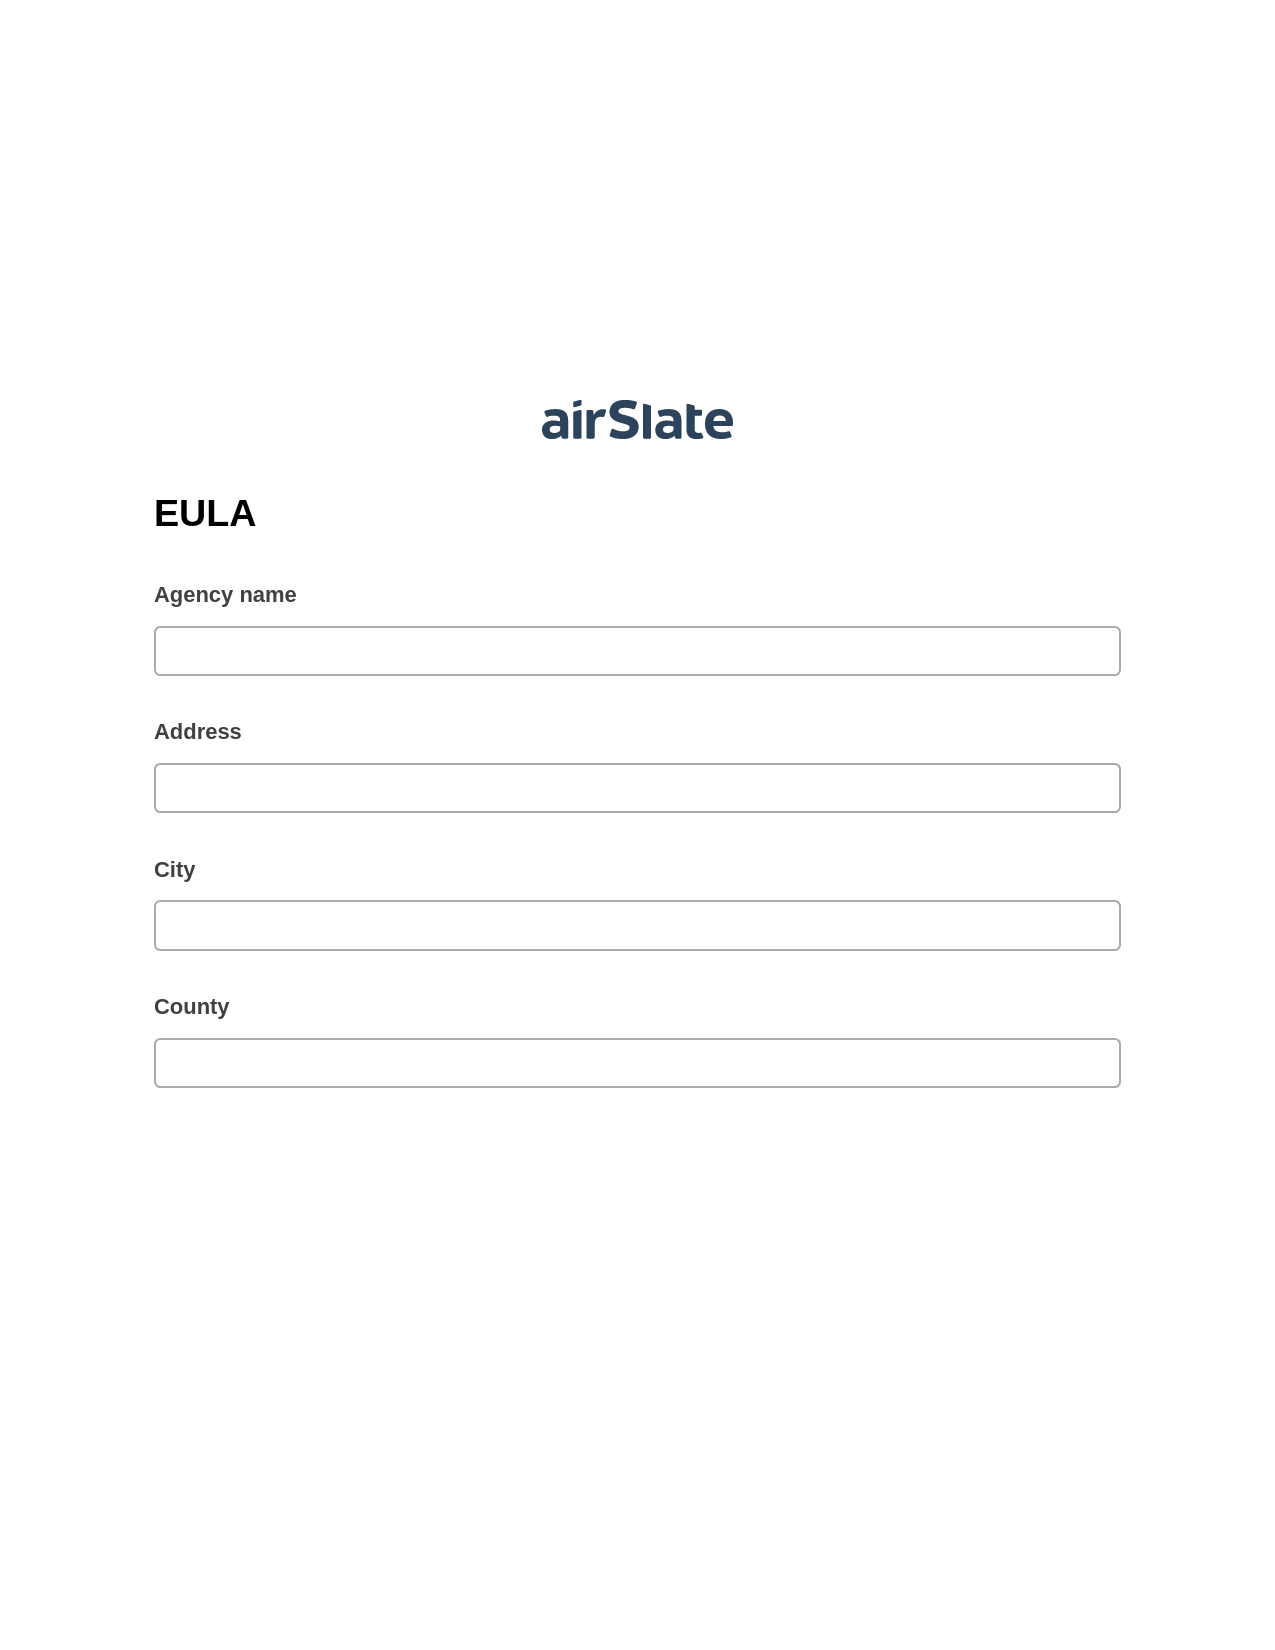 EULA Pre-fill Slate from MS Dynamics 365 Records Bot, Set signature type addon, Post-finish Document Bot